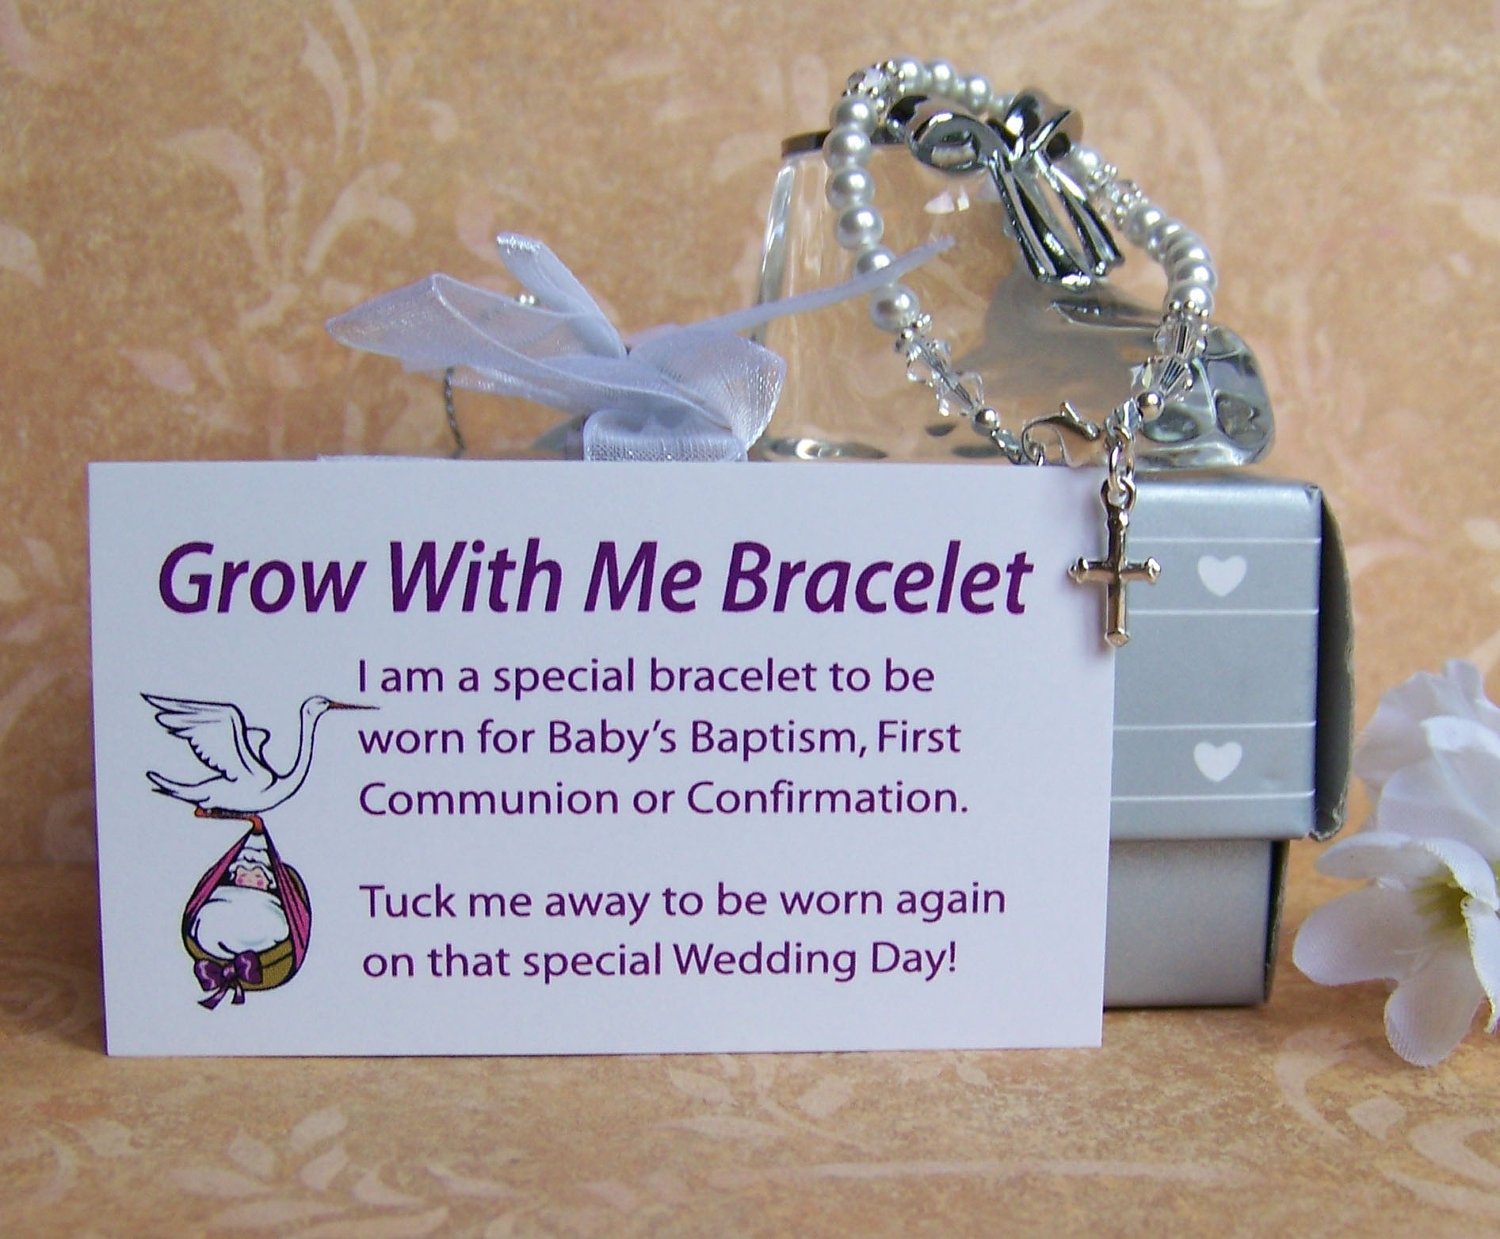 10 Famous Gift Ideas For Baptism Girl baby girl baptism bracelet grow with me 38 00 via etsy its a 2 2022